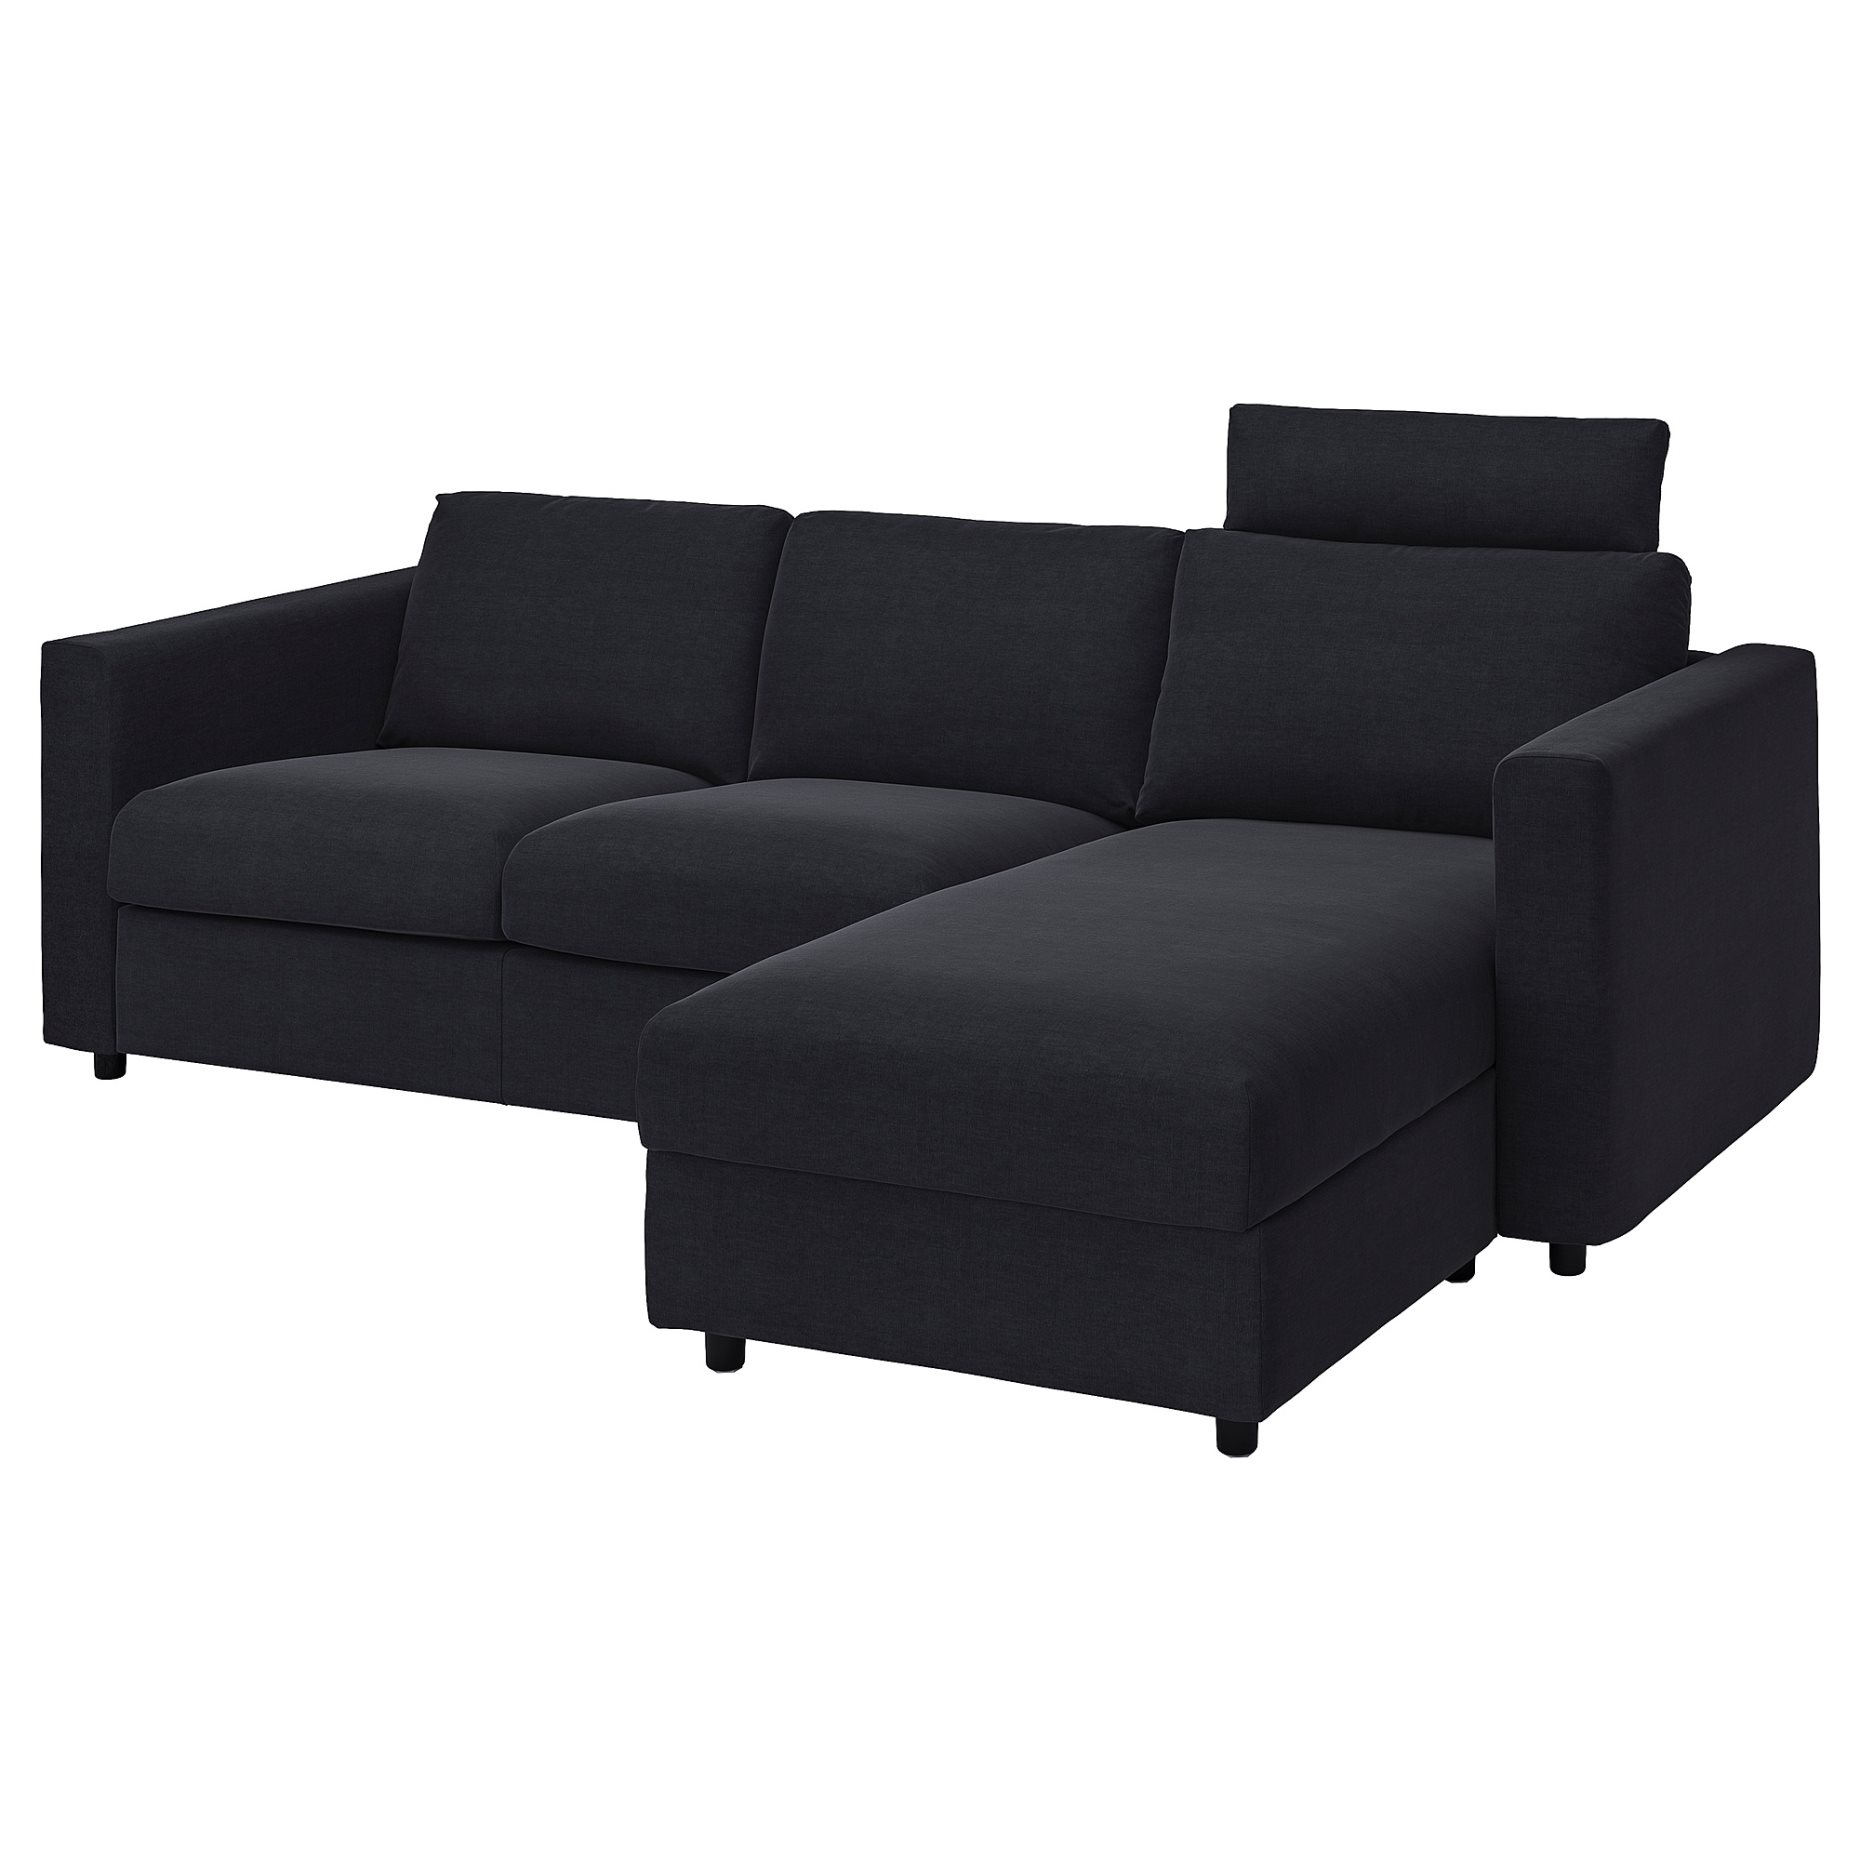 VIMLE, 4-seat sofa with chaise longue with wide armrests, 293.991.36